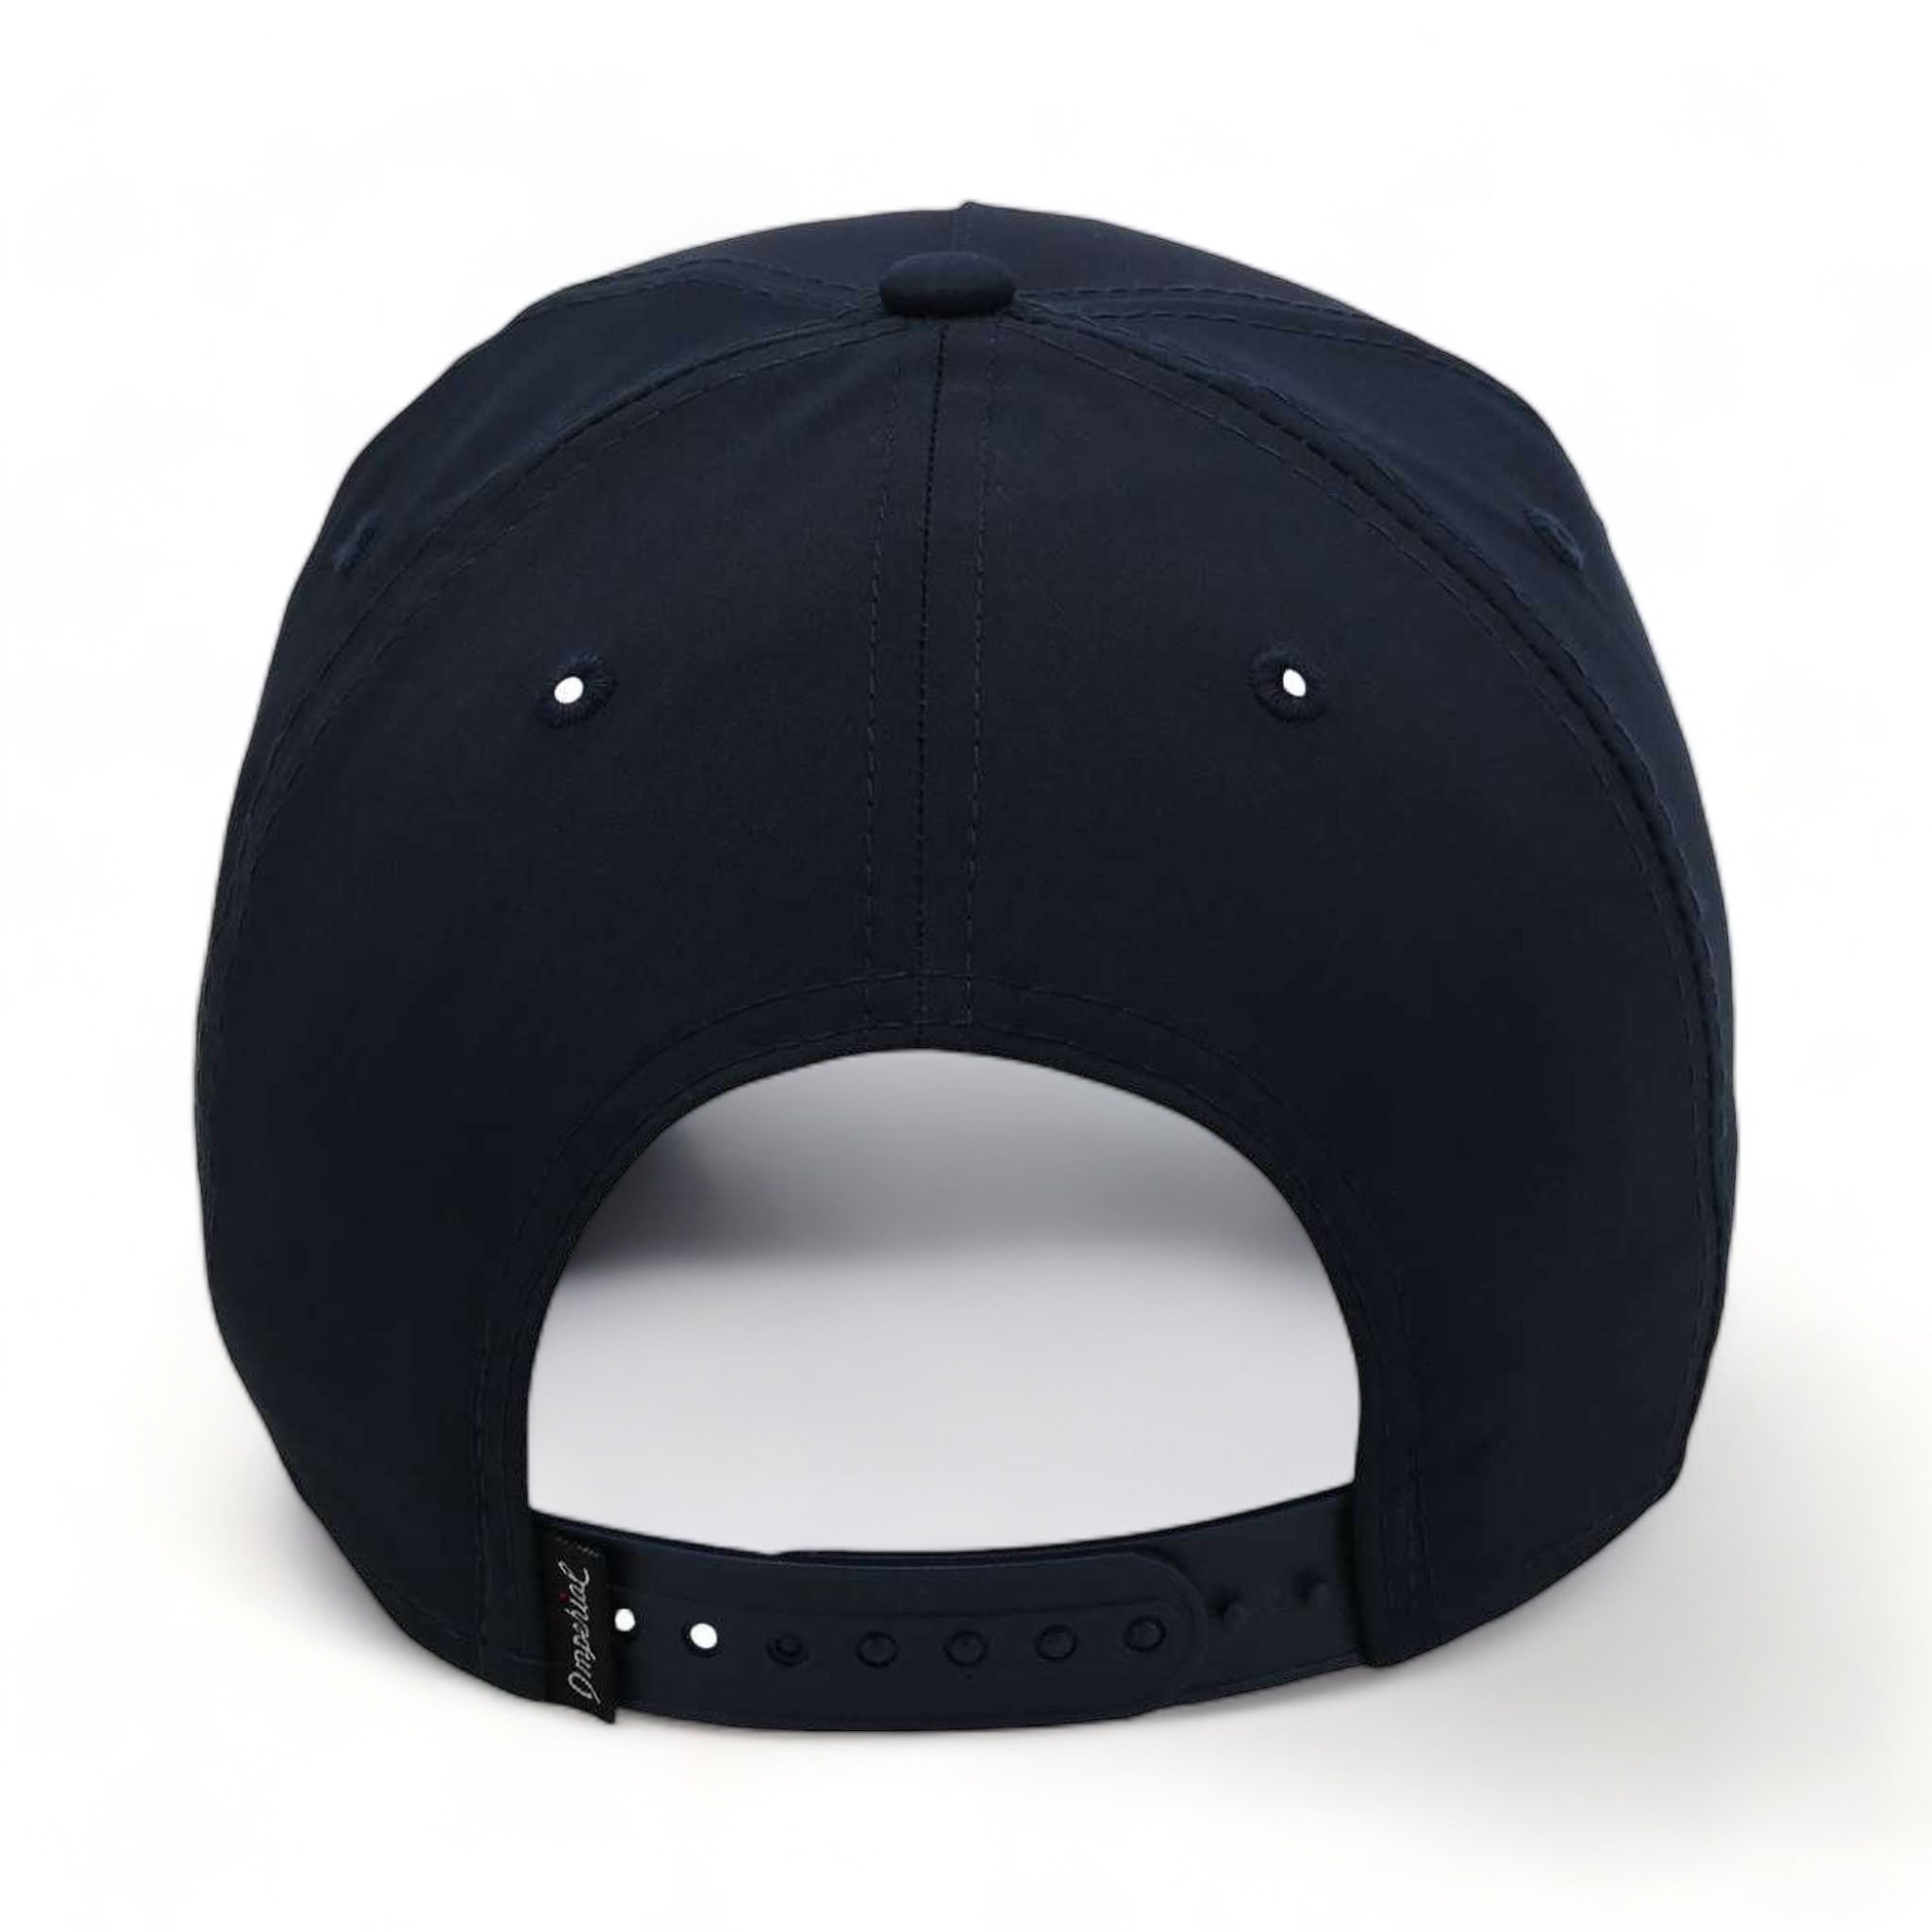 Back view of Imperial 5054 custom hat in navy and light blue